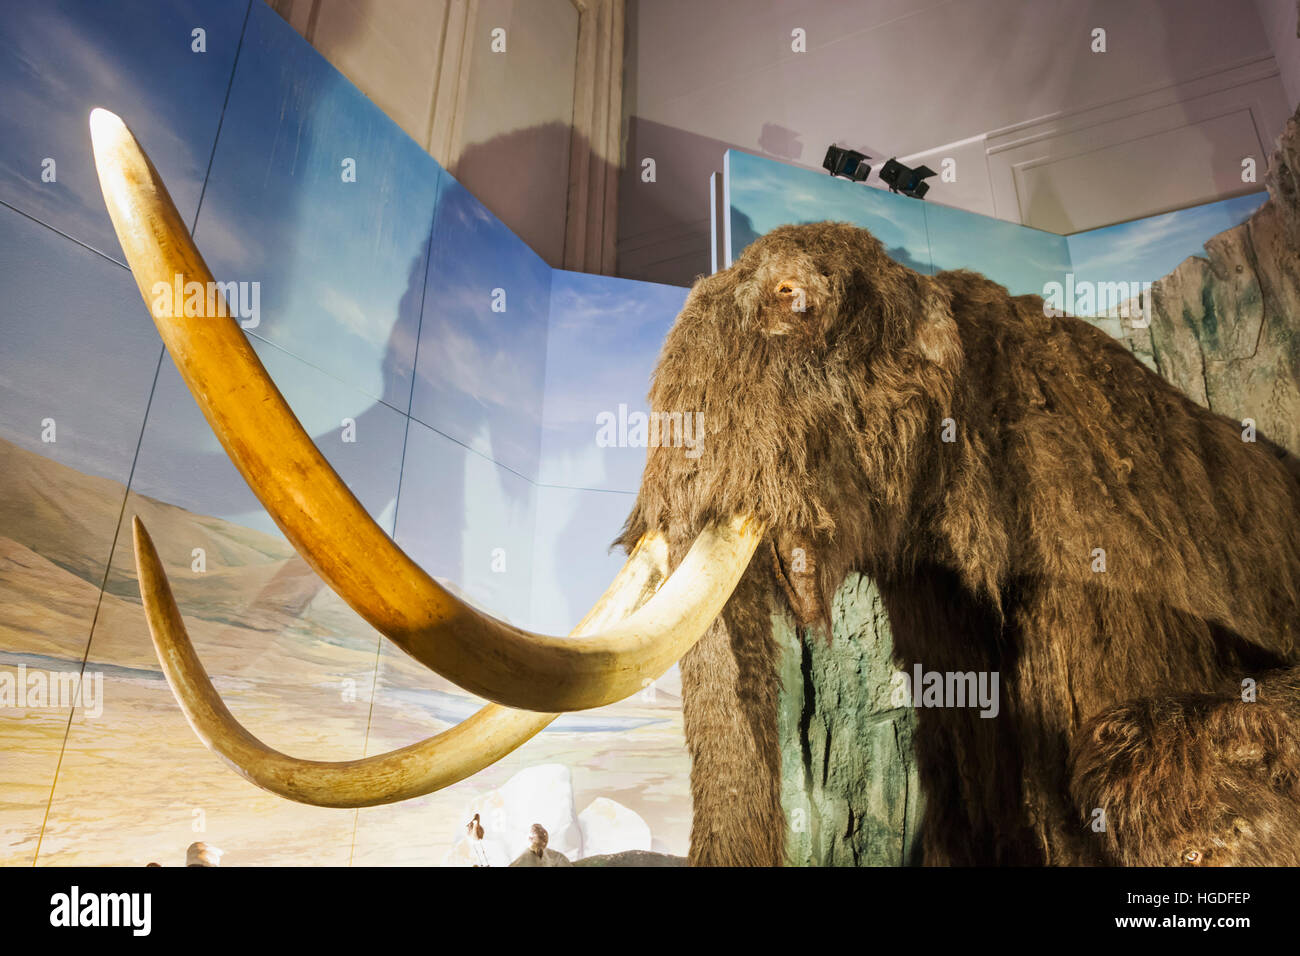 Wales, Cardiff, National Museum Cardiff, Woolly Mammoth Stock Photo